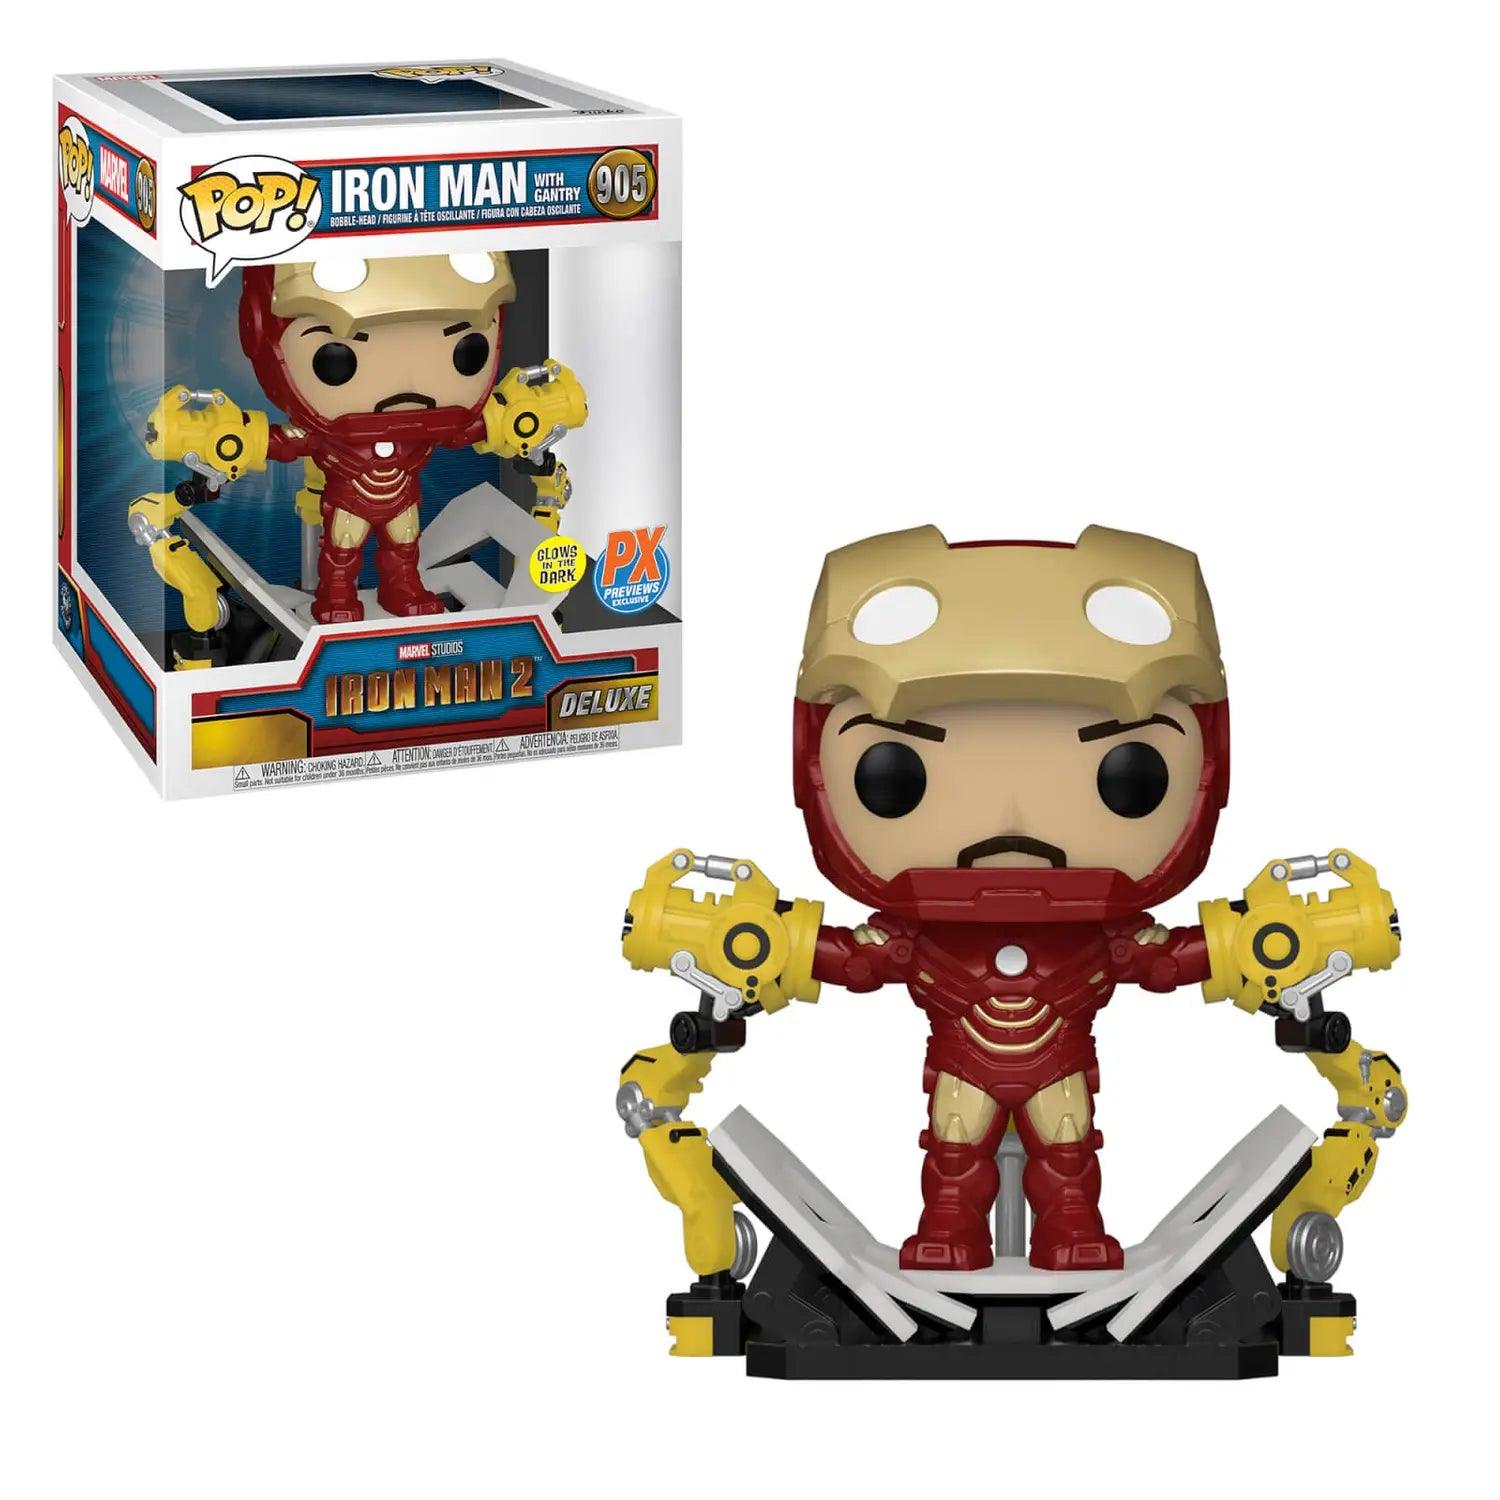 Pop! Super - Marvel - Iron Man 2 - Iron Man With Gantry - #905 - PX Previews EXCLUSIVE - Hobby Champion Inc